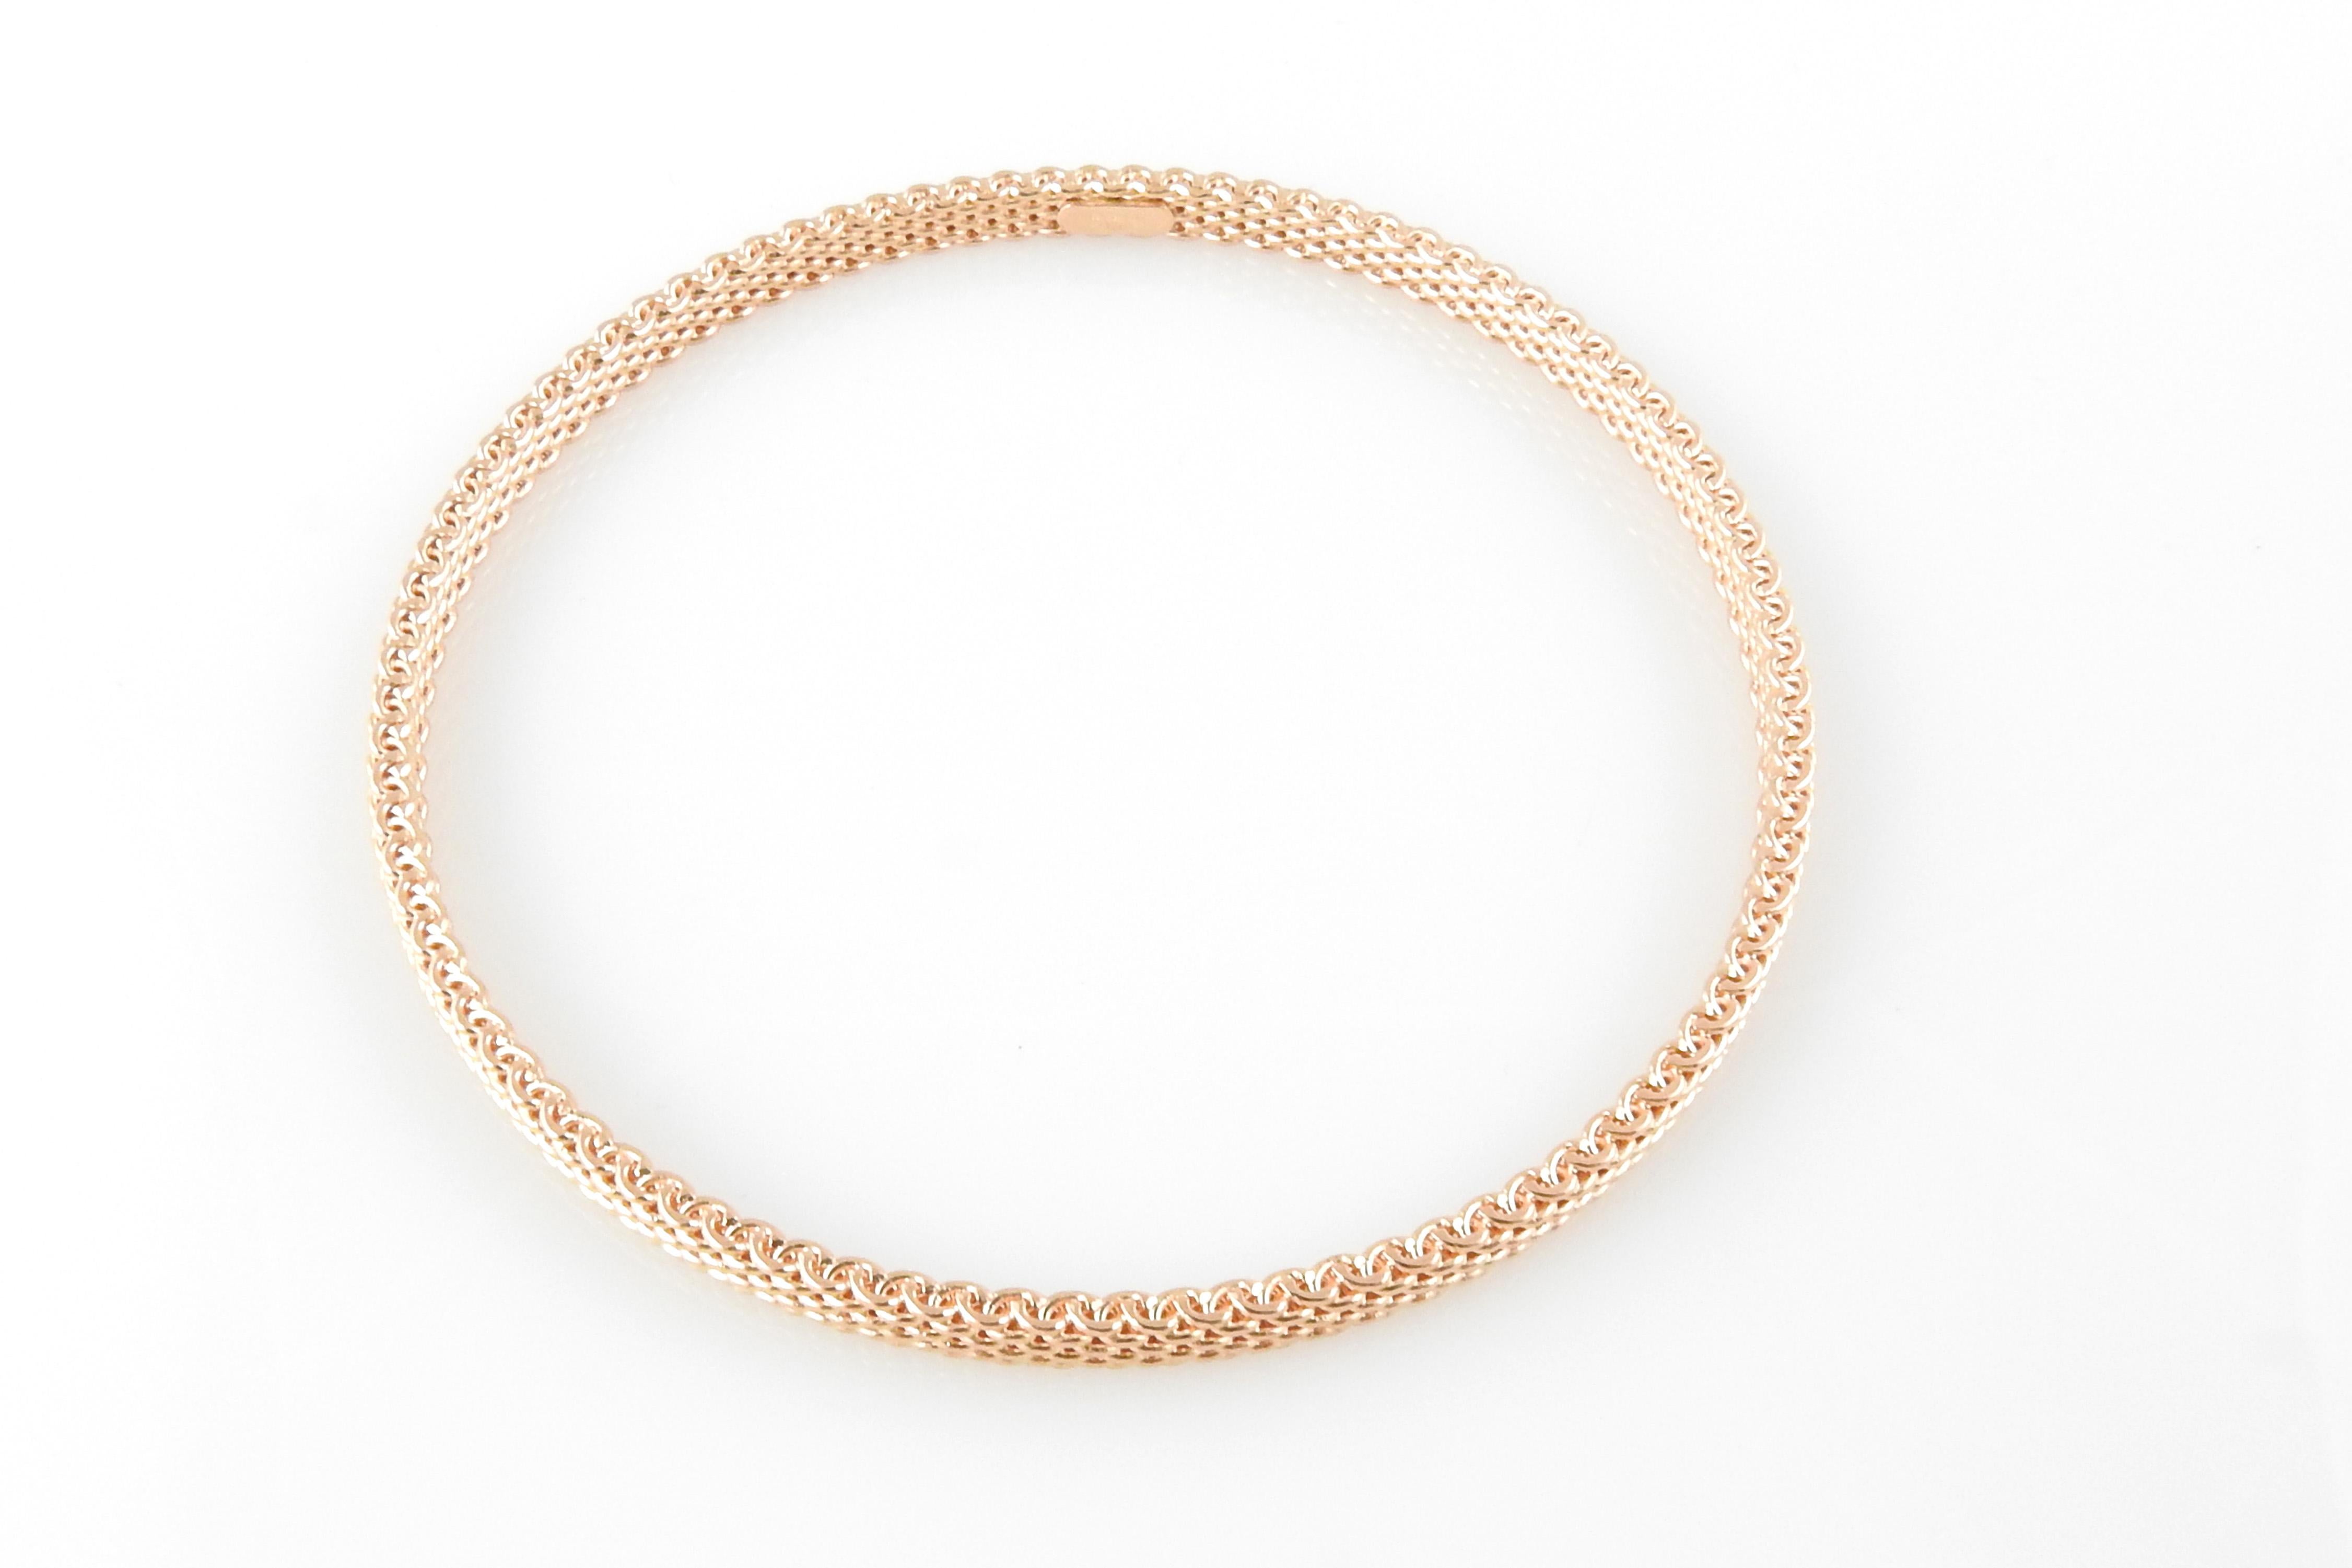 Tiffany & Co. 18K Rose Gold Somerset Mesh Bracelet

This beautiful Tiffany & Co. mesh bangle bracelet is set in 18K rose gold.

**Matching bracelets available in our store in yellow and white gold**

Bracelet is approx. 4mm wide, and 8